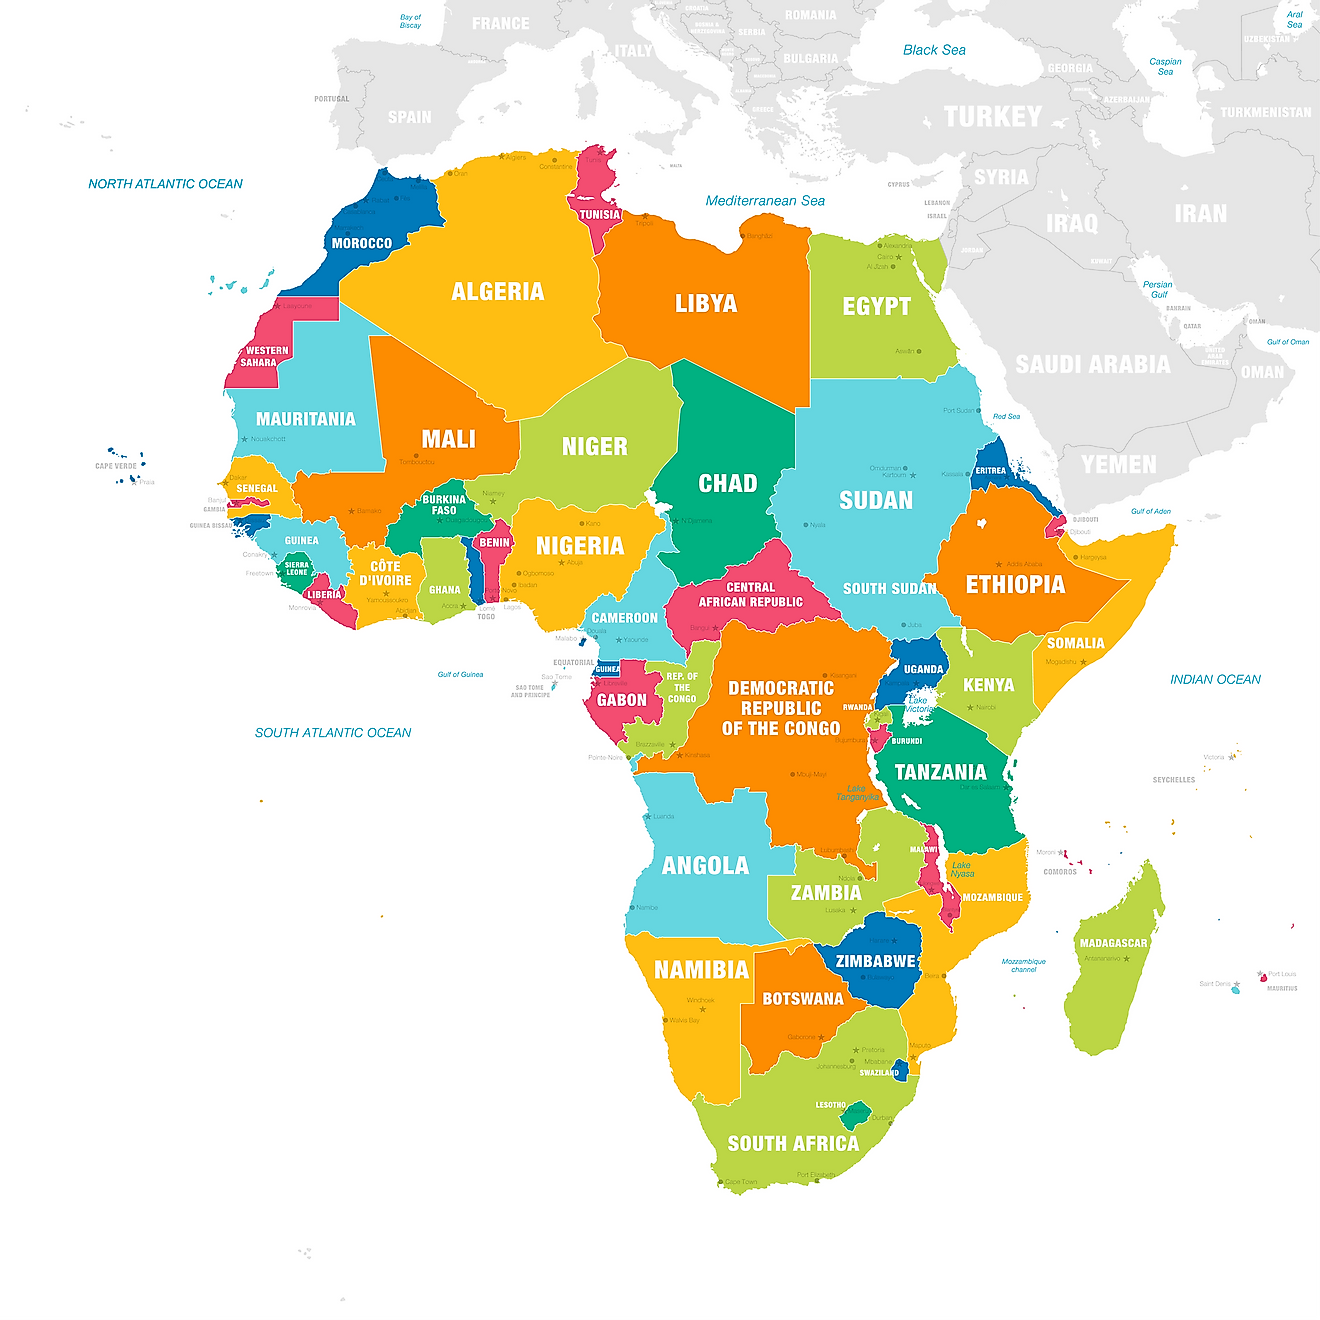 Countries In Africa Continent Map How Many Countries Are There In Africa? - Worldatlas